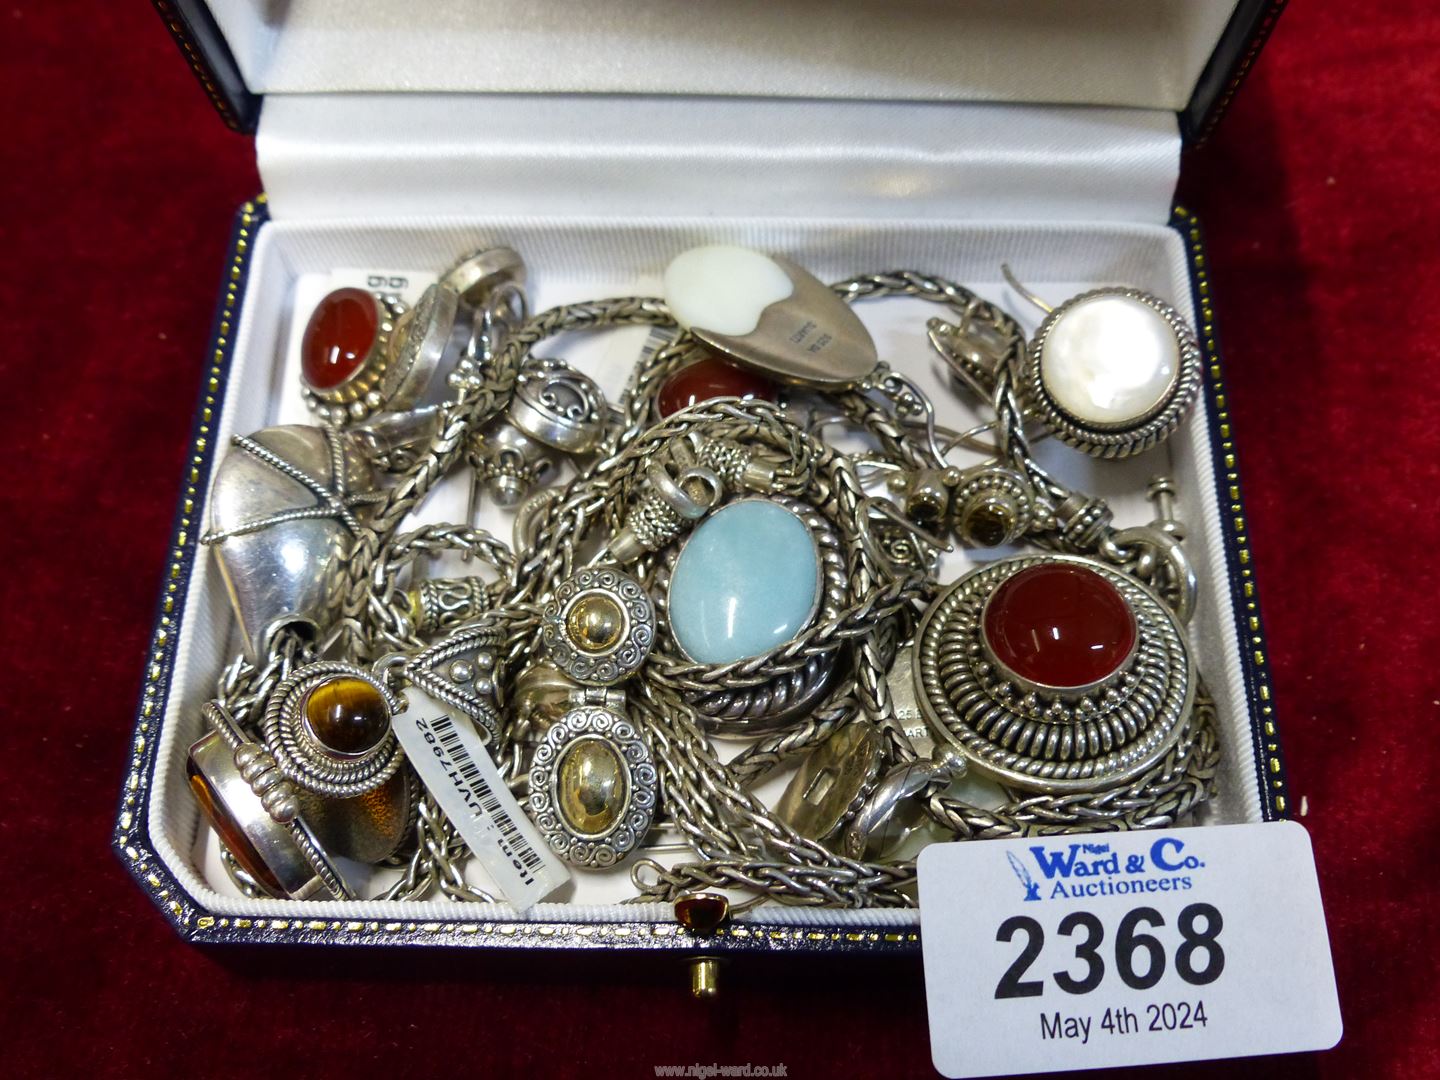 A quantity of 925 Suarti Bohemian style jewellery including necklaces, pendant, earrings, etc. - Image 2 of 2